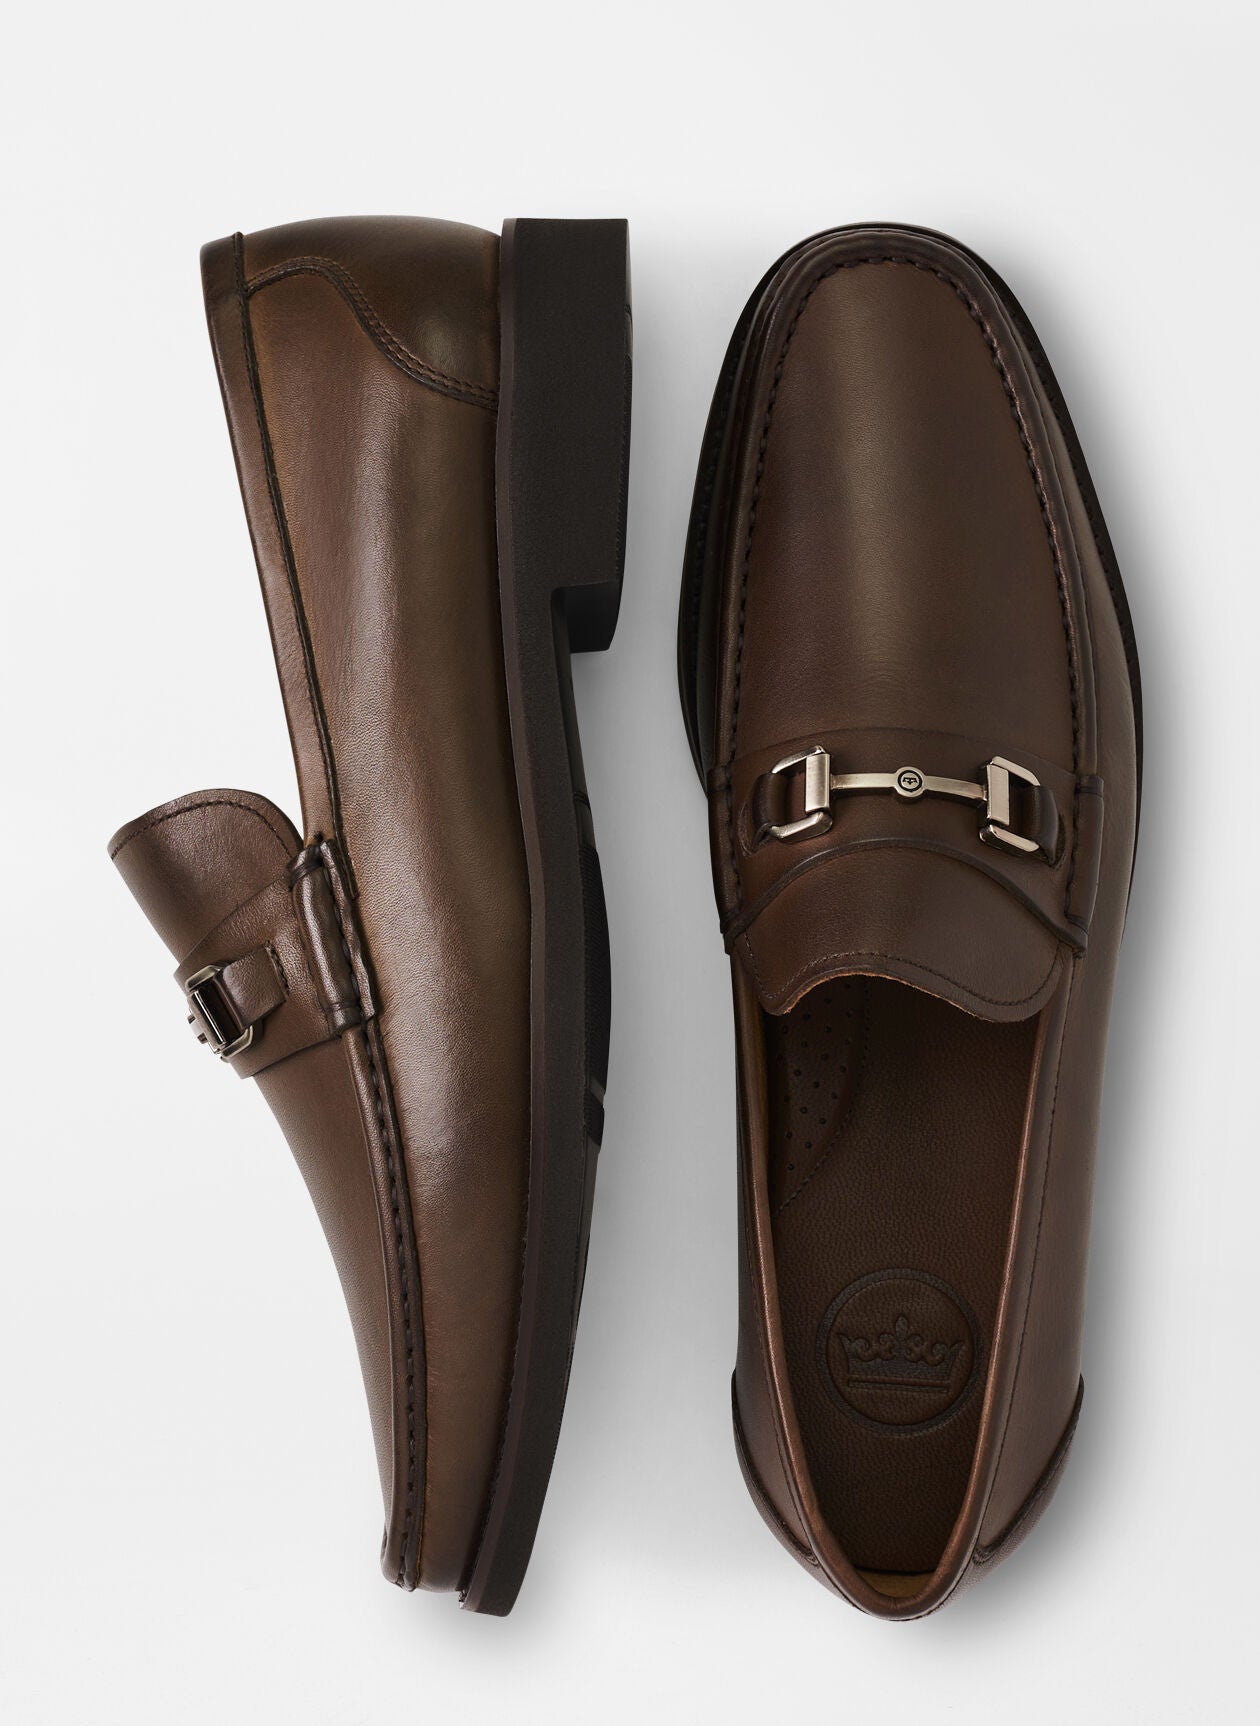 Bailey croc-effect leather loafers